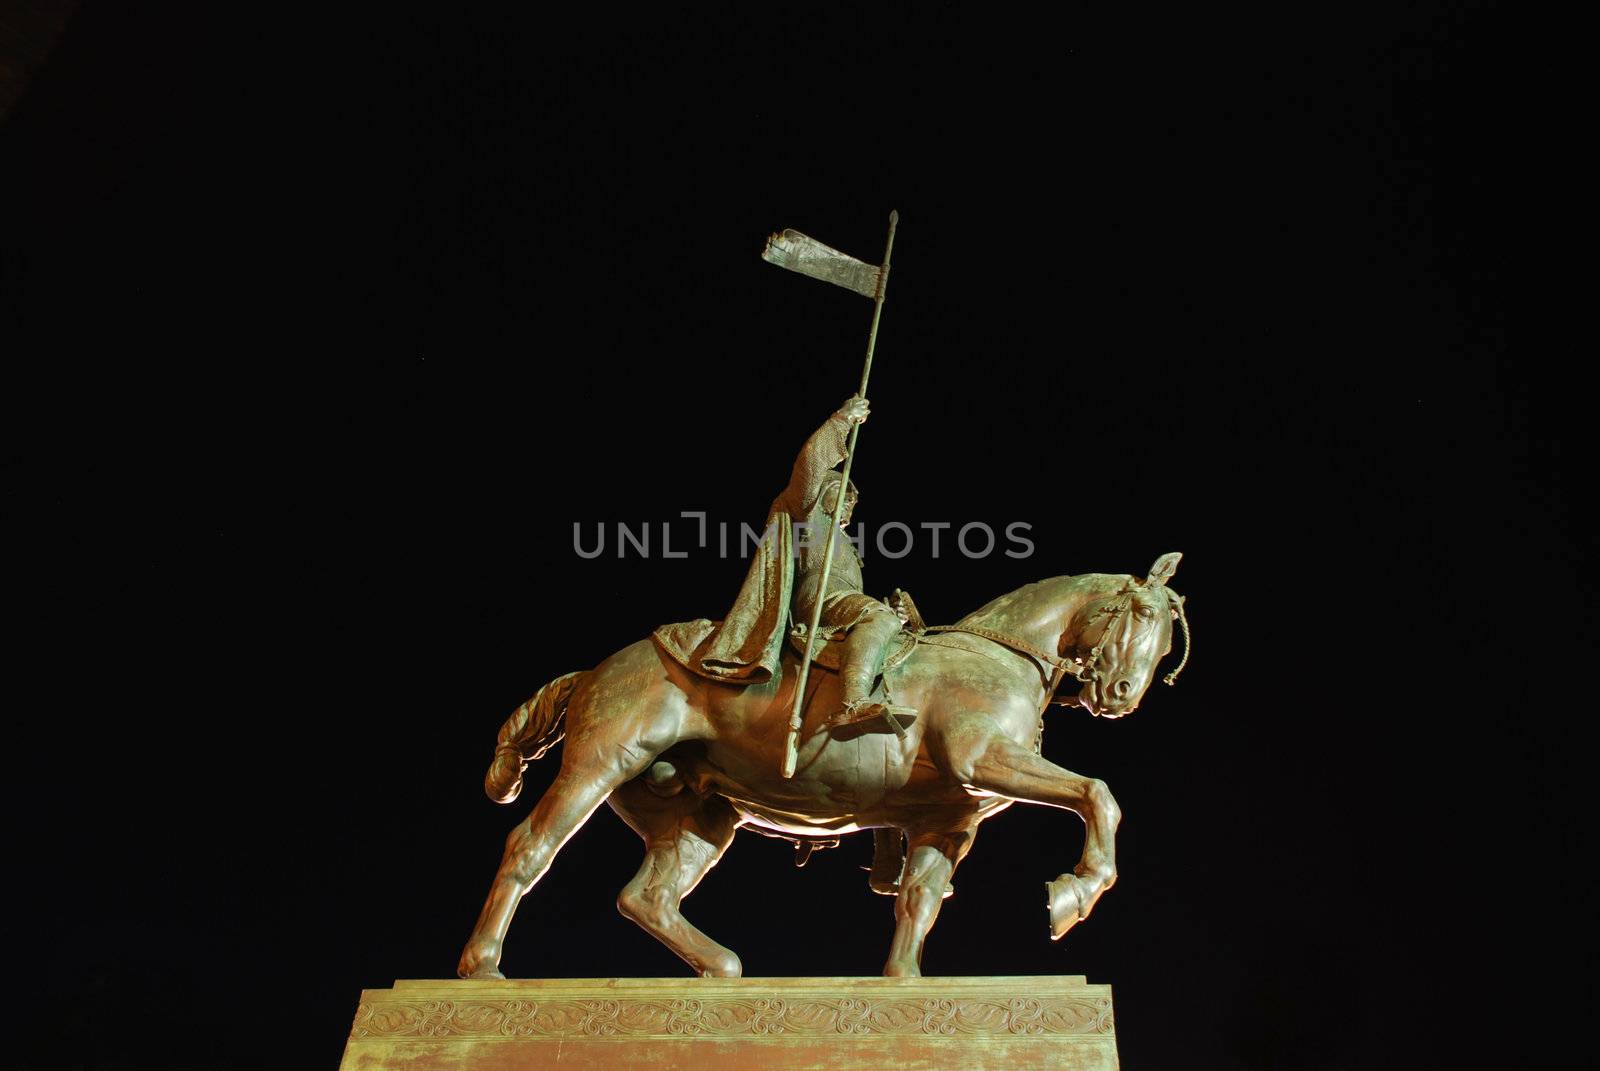 Statue of czech hero knight saint Wencesals in the middle of the Prague in the night